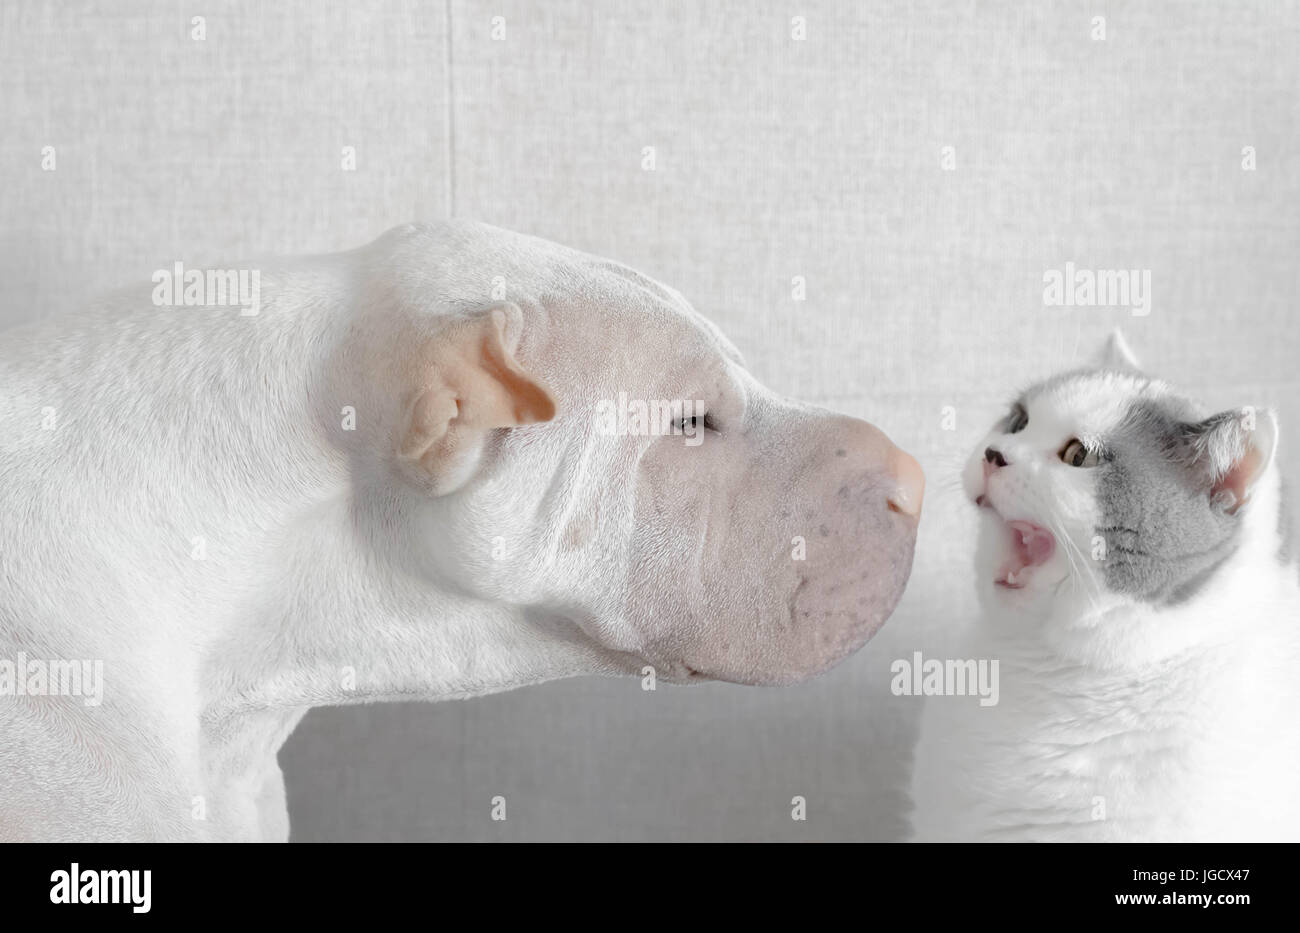 shar-pei dog face to face with a British shorthair cat Stock Photo